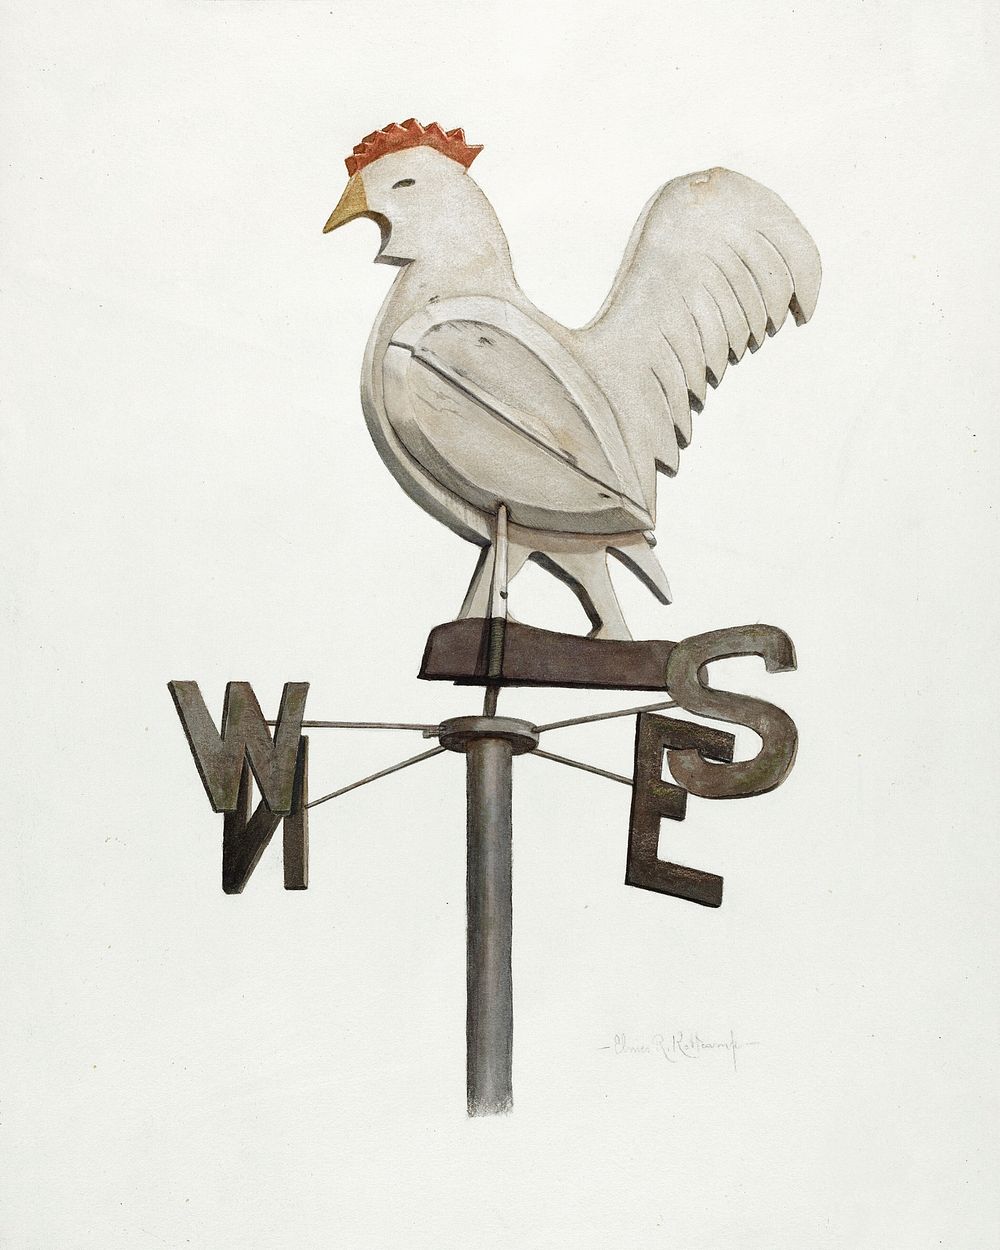 Weather Vane (c. 1941) by Elmer R. Kottcamp. Original from The National Gallery of Art. Digitally enhanced by rawpixel.